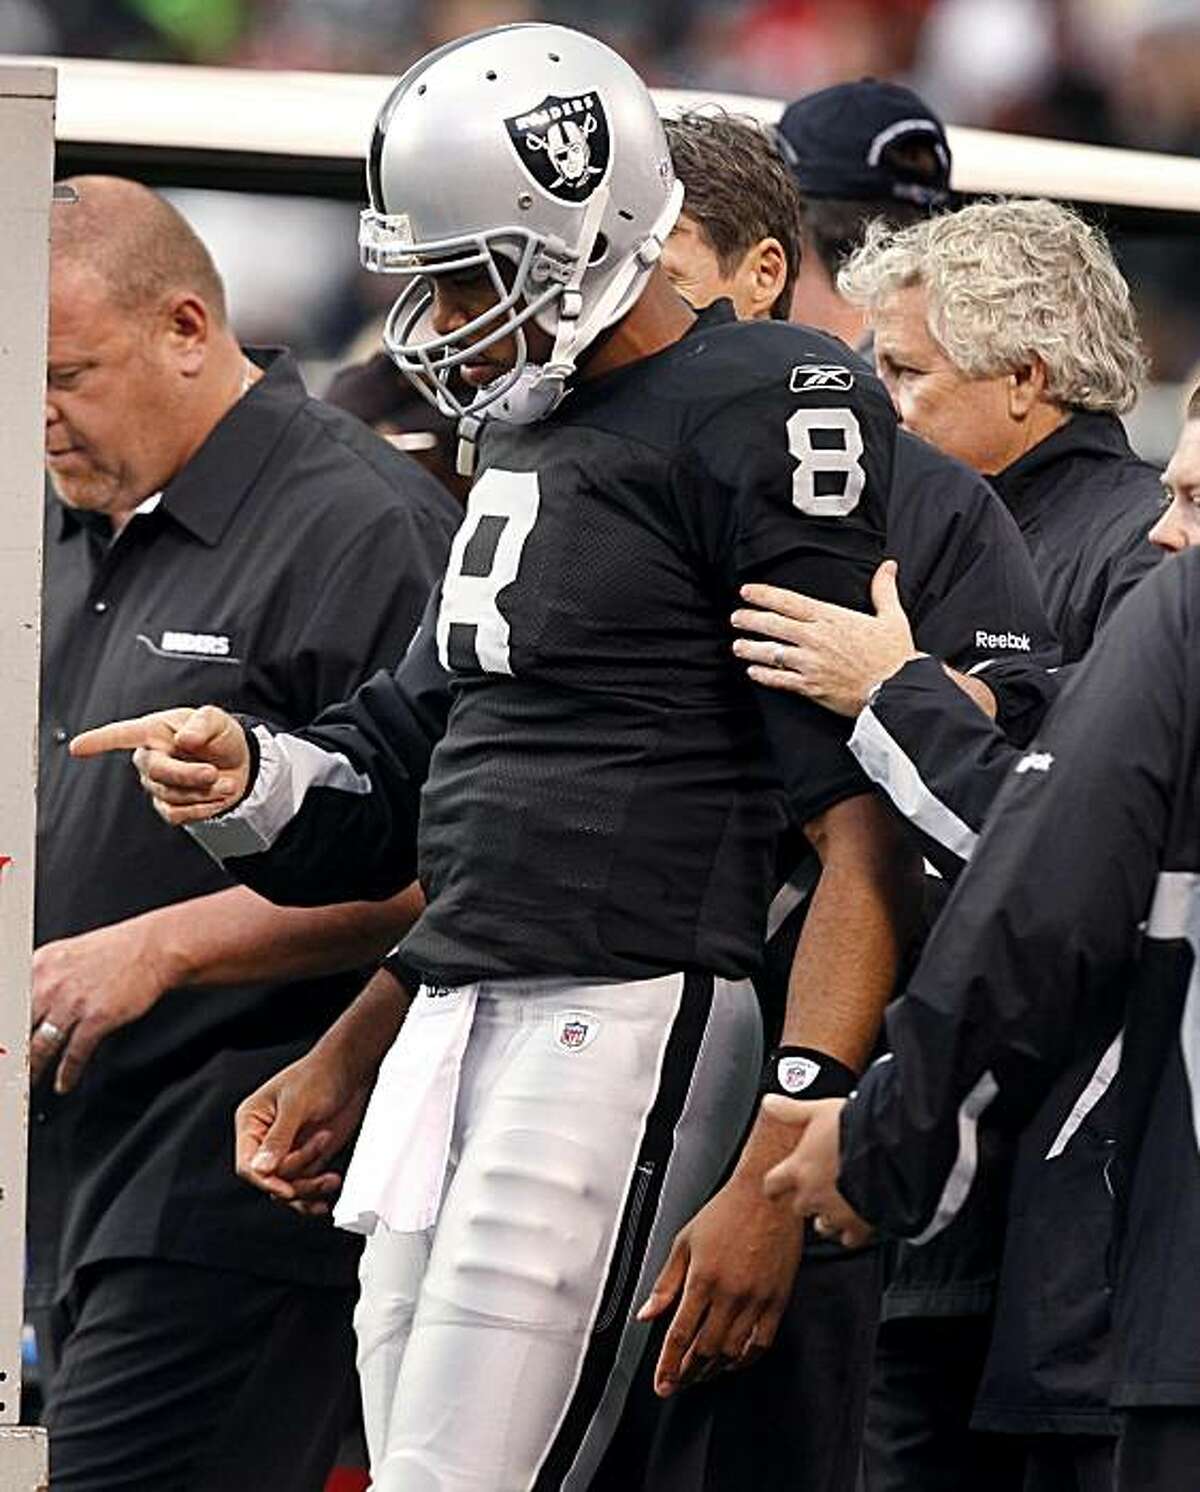 Raiders quarterback Jason Campbell is helped off the field after he left the game in the second quarter against the 49ers in Oakland on Saturday.